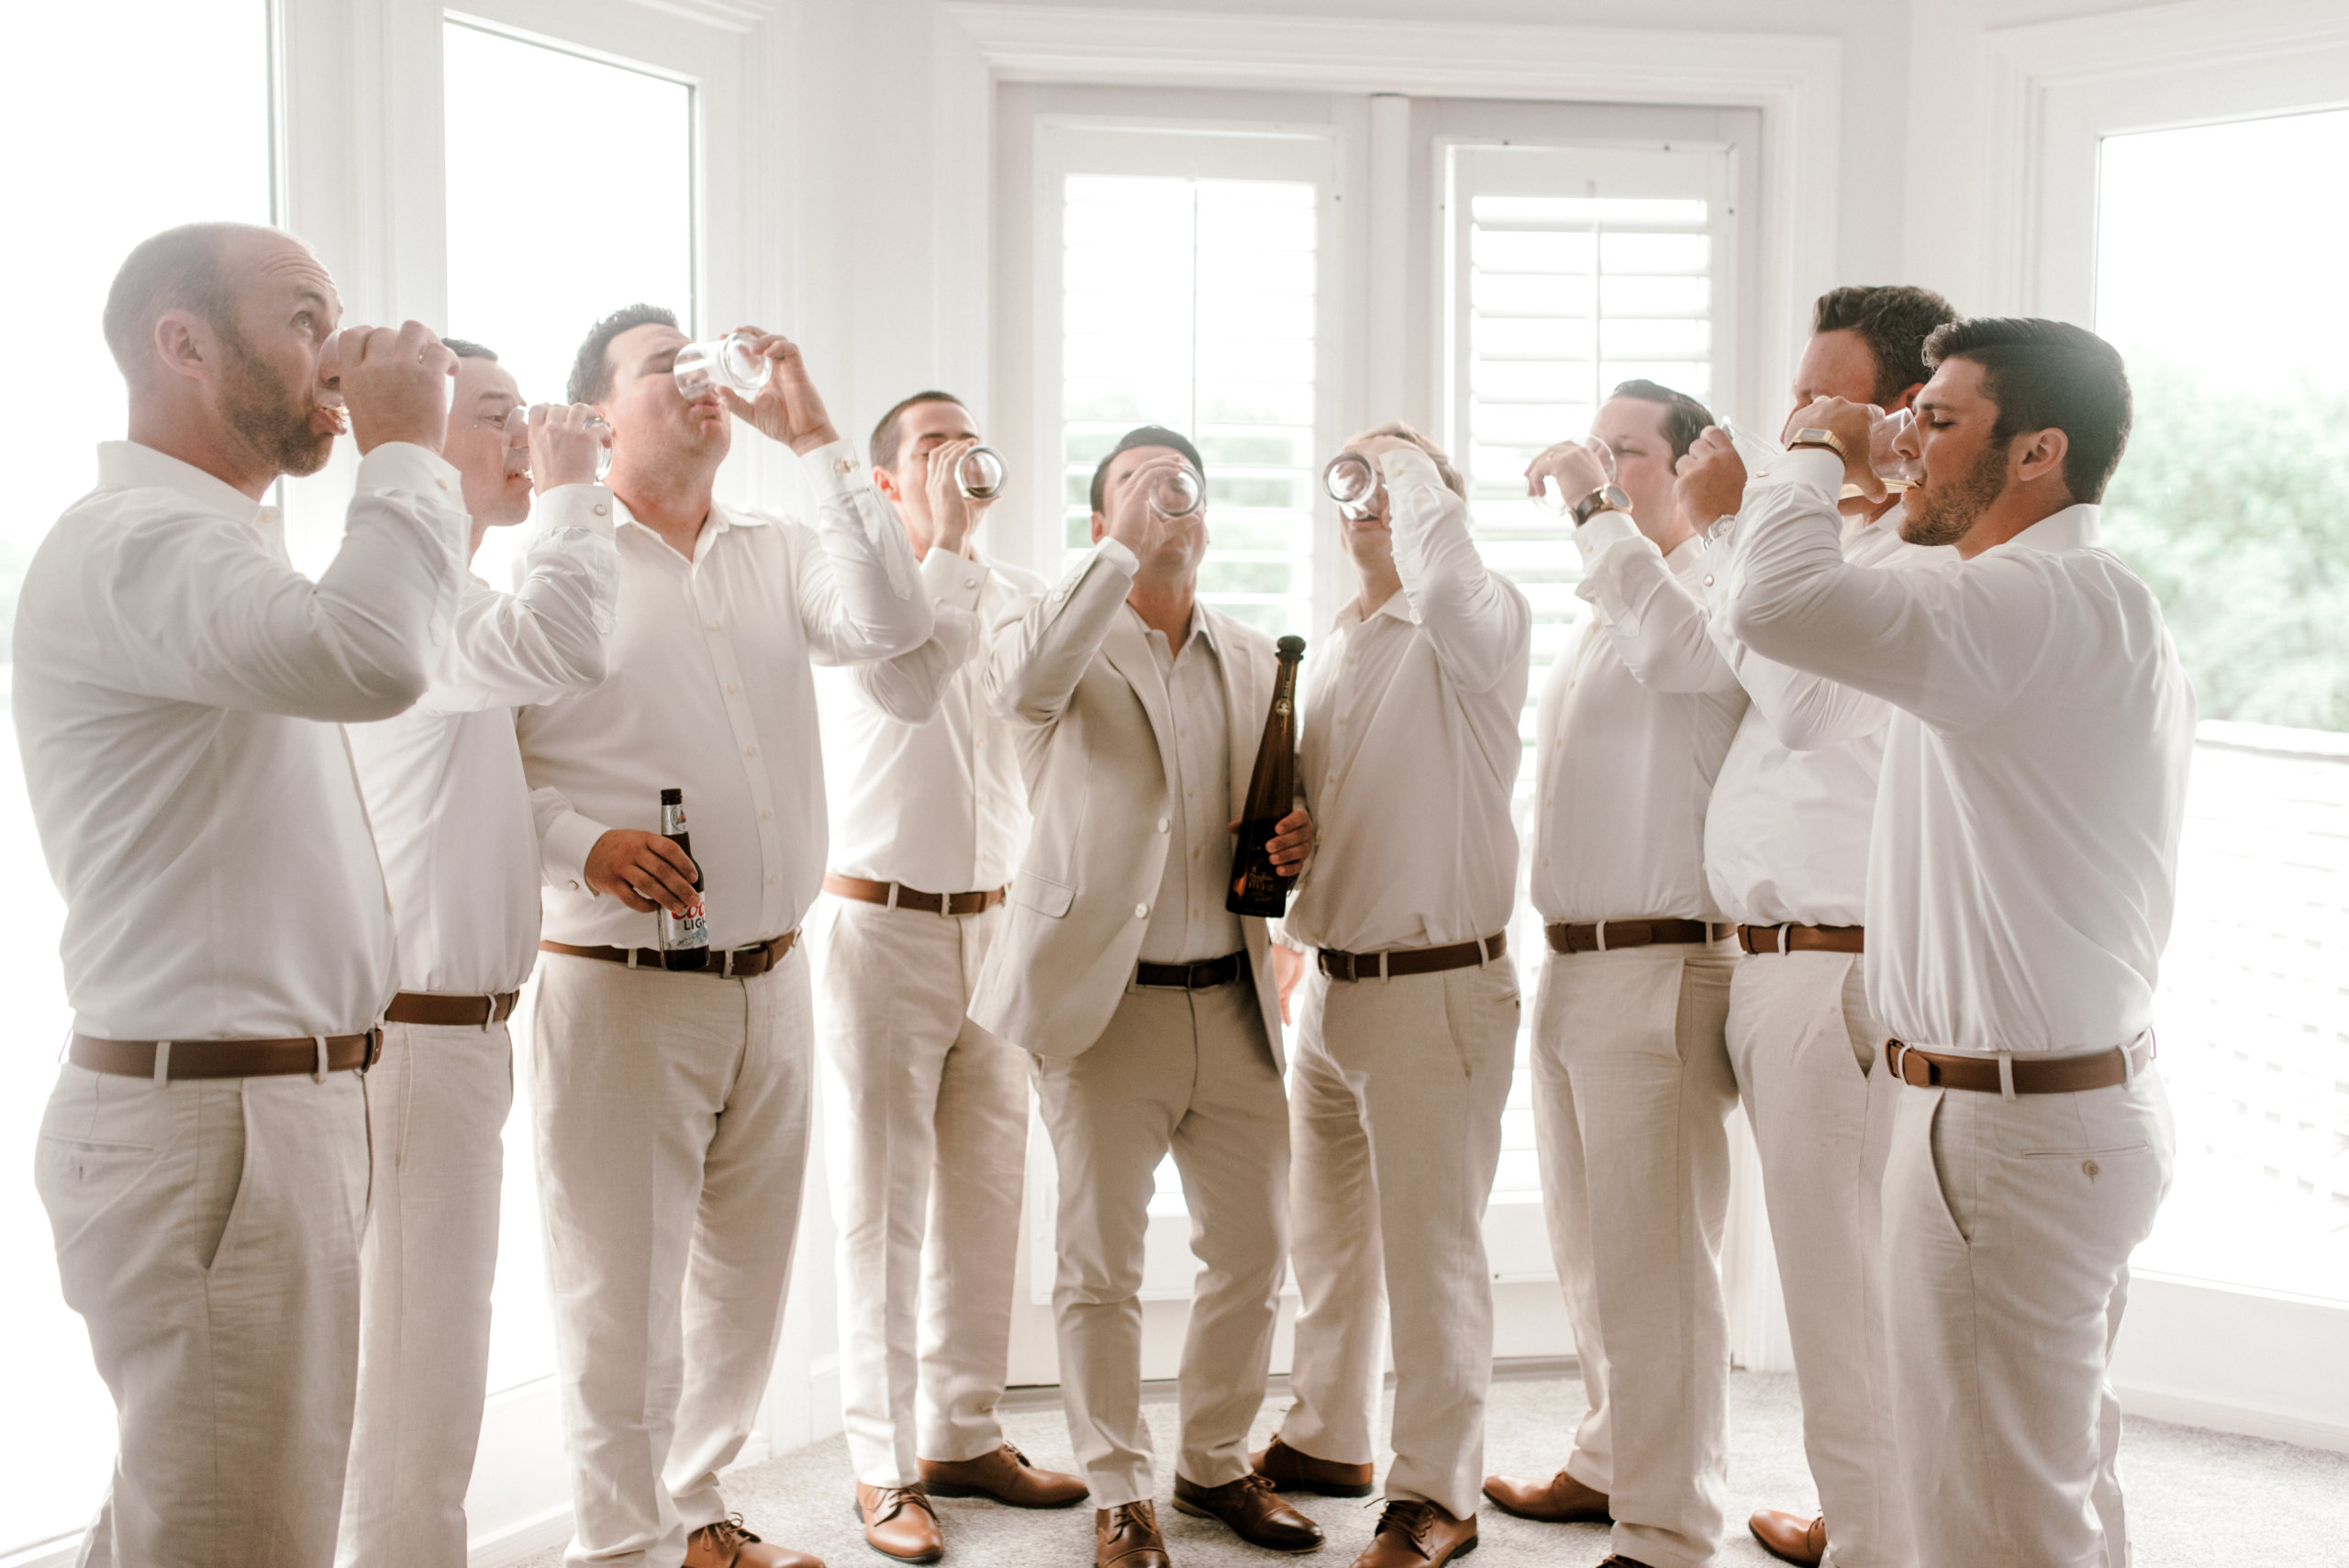 Groom and groomsmen sharing a drink before wedding day